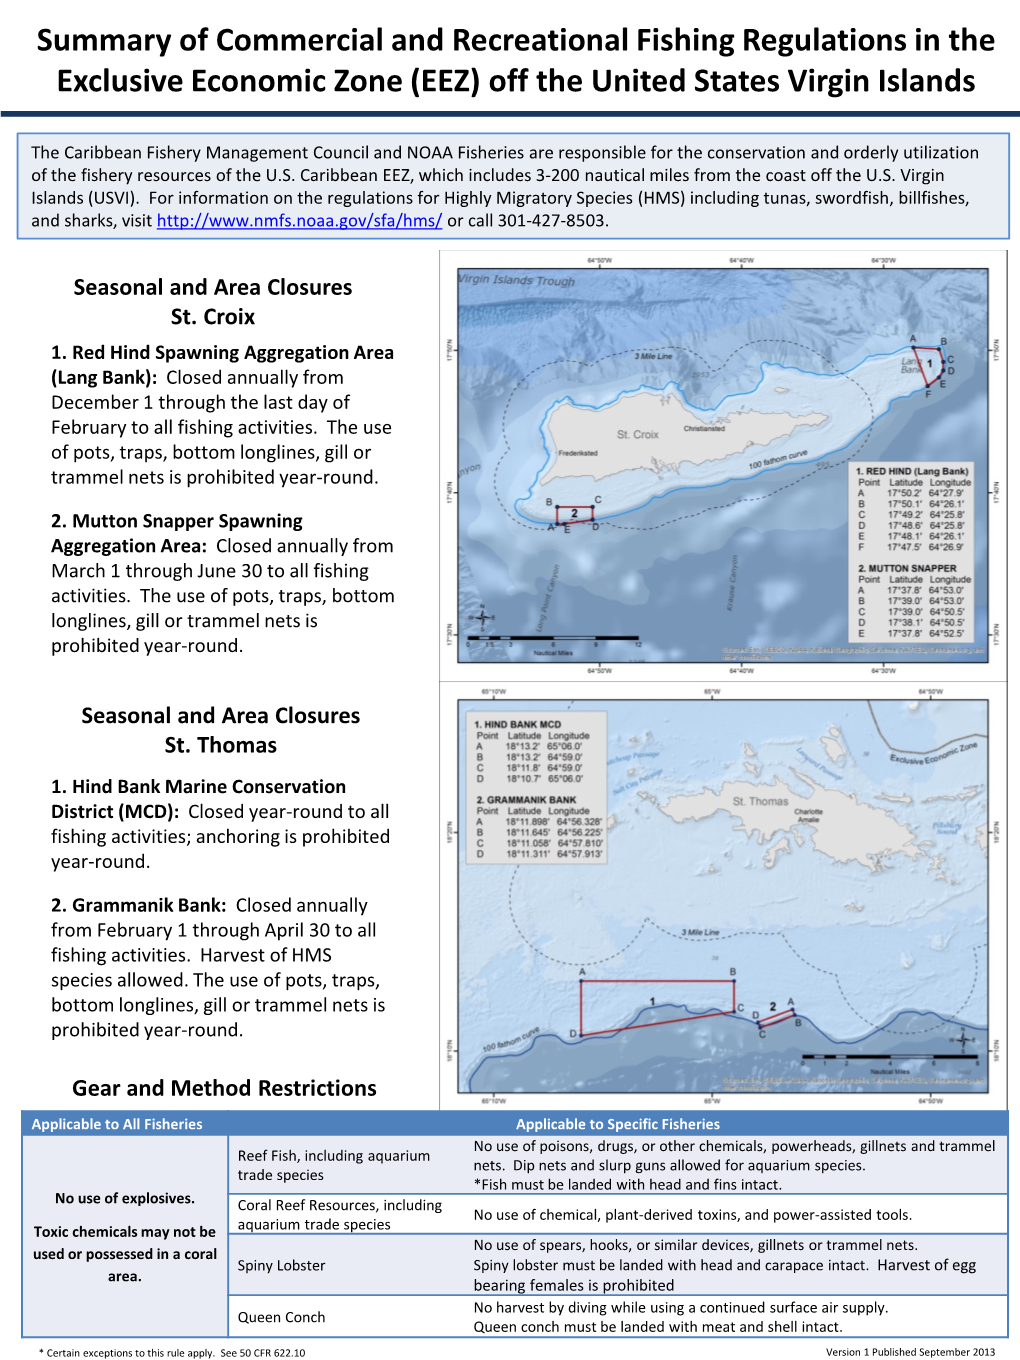 Summary of Commercial and Recreational Fishing Regulations in the Exclusive Economic Zone (EEZ) Off the United States Virgin Islands